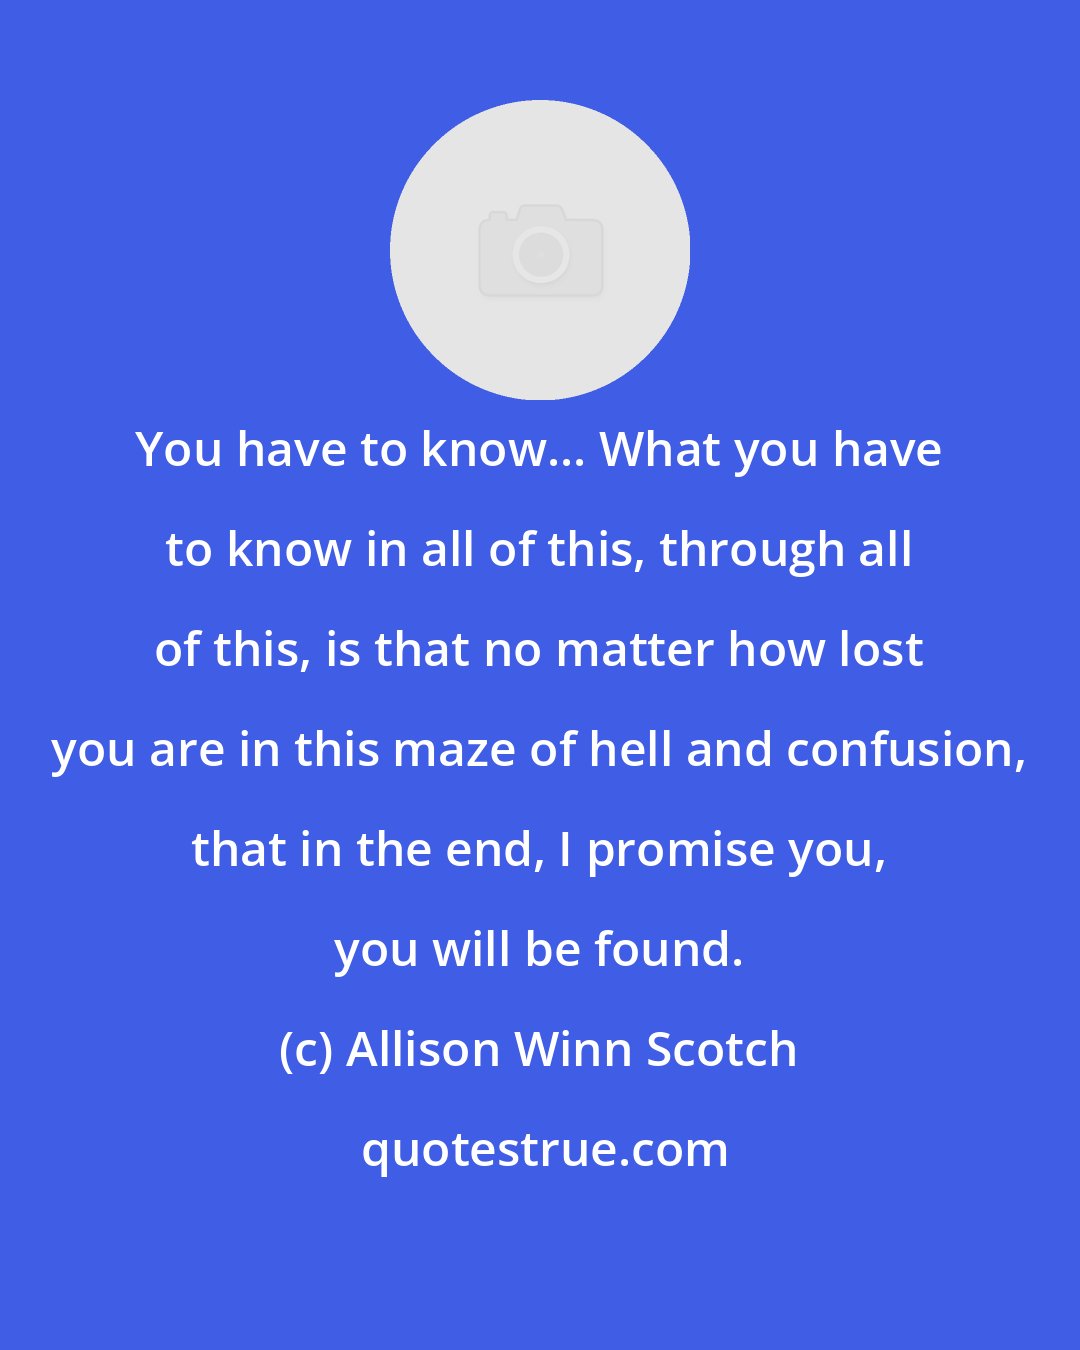 Allison Winn Scotch: You have to know... What you have to know in all of this, through all of this, is that no matter how lost you are in this maze of hell and confusion, that in the end, I promise you, you will be found.